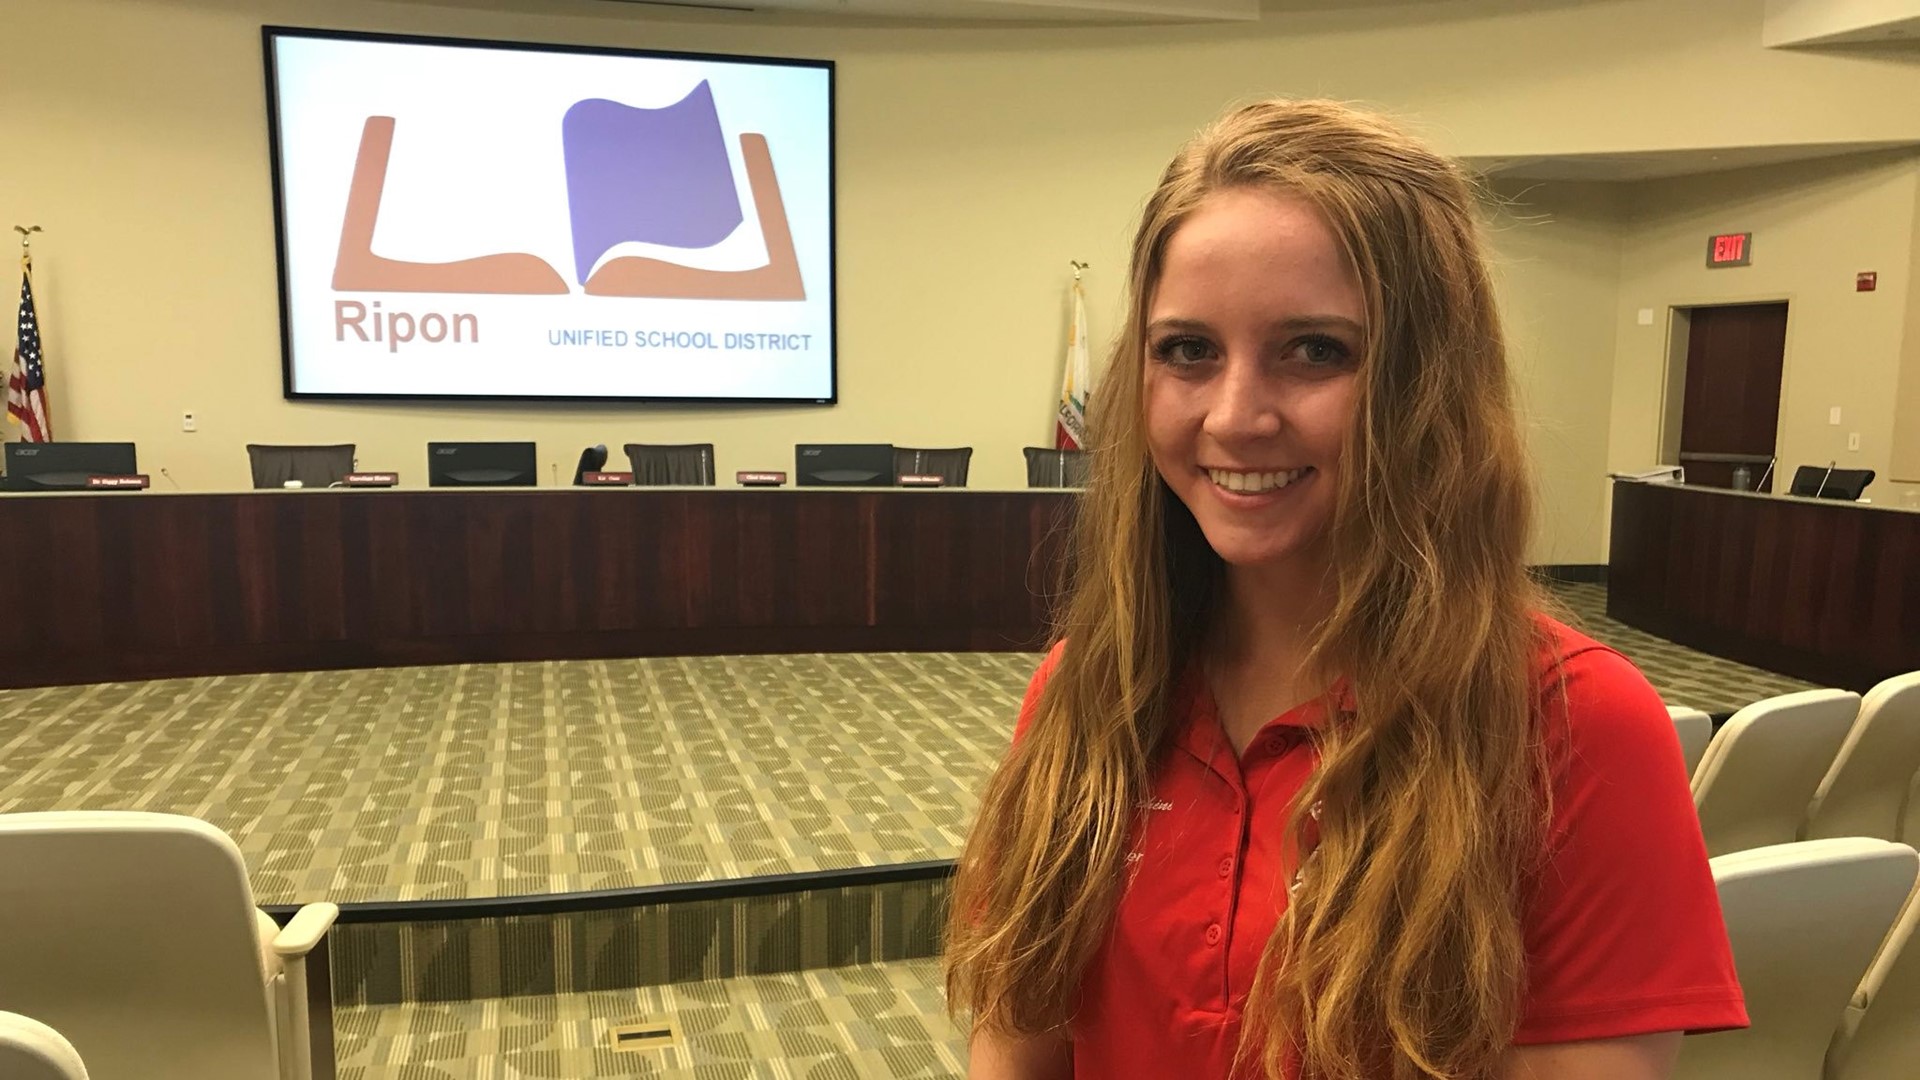 Gianna Brocchini, a senior at Ripon High School, will get to weigh in and vote on all decisions at Ripon Unified School Board meetings, except for personnel matters.